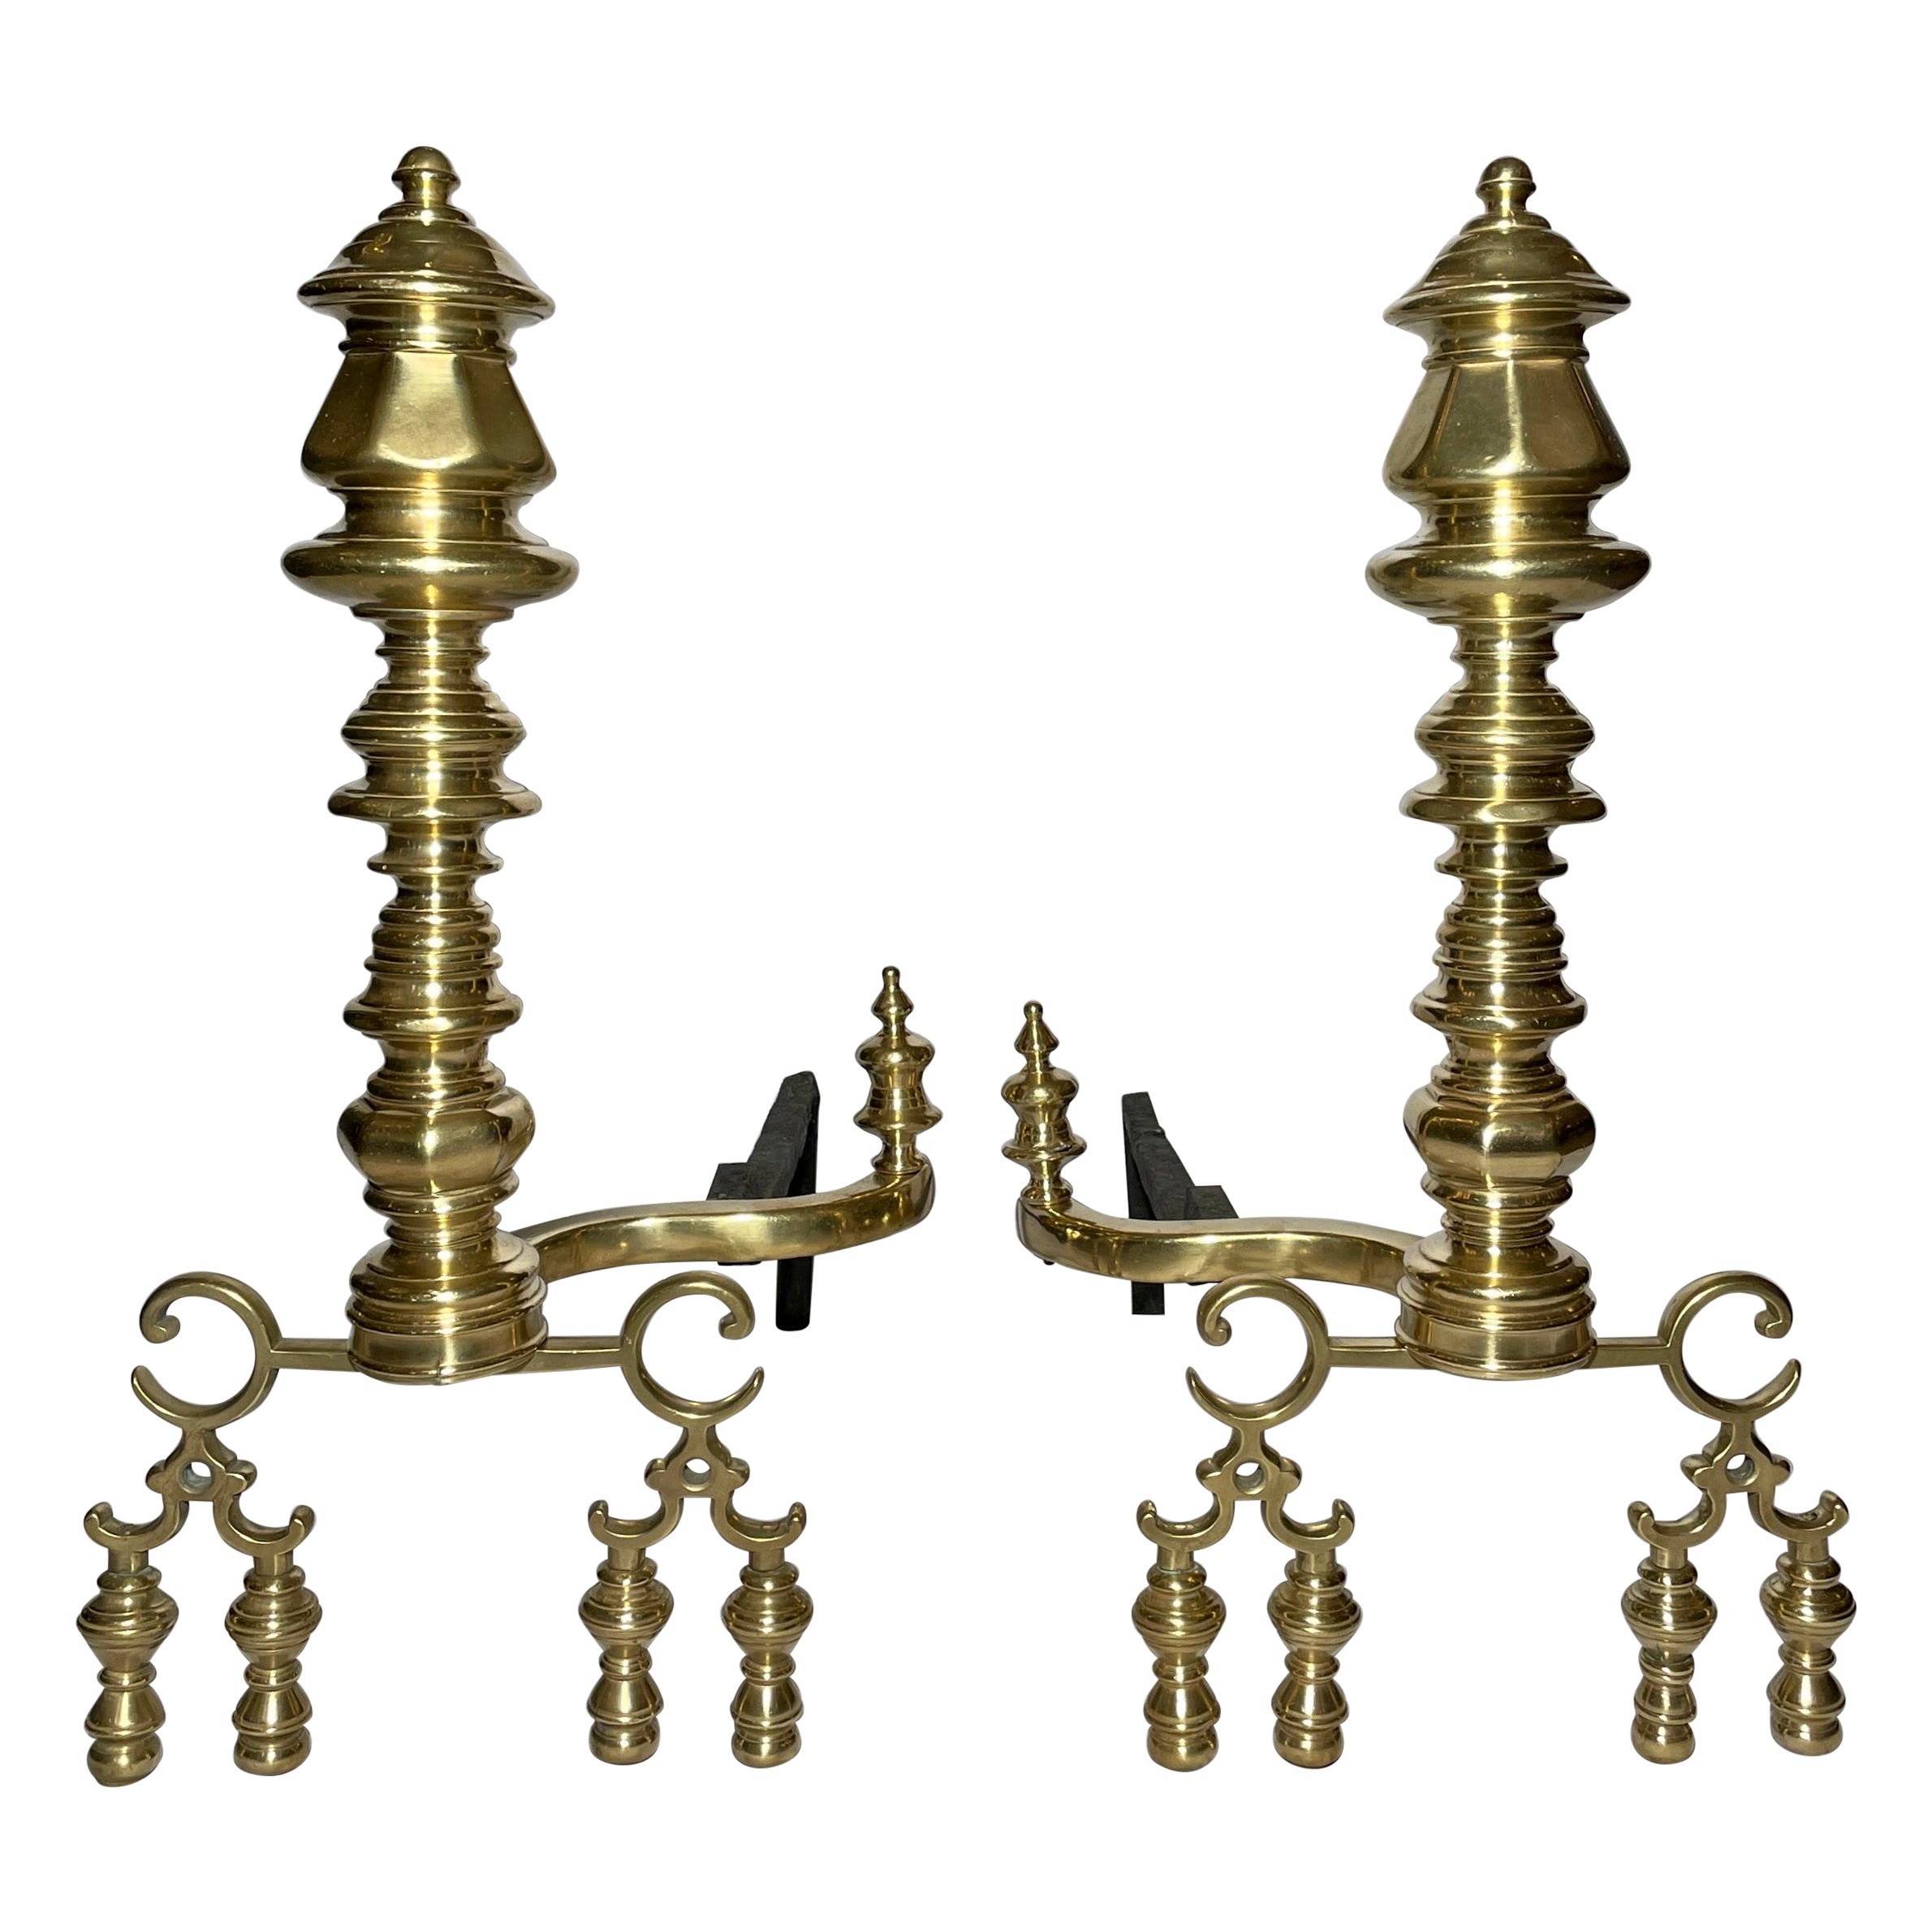 Antique English Polished Brass Fireplace Andirons, circa 1860 For Sale